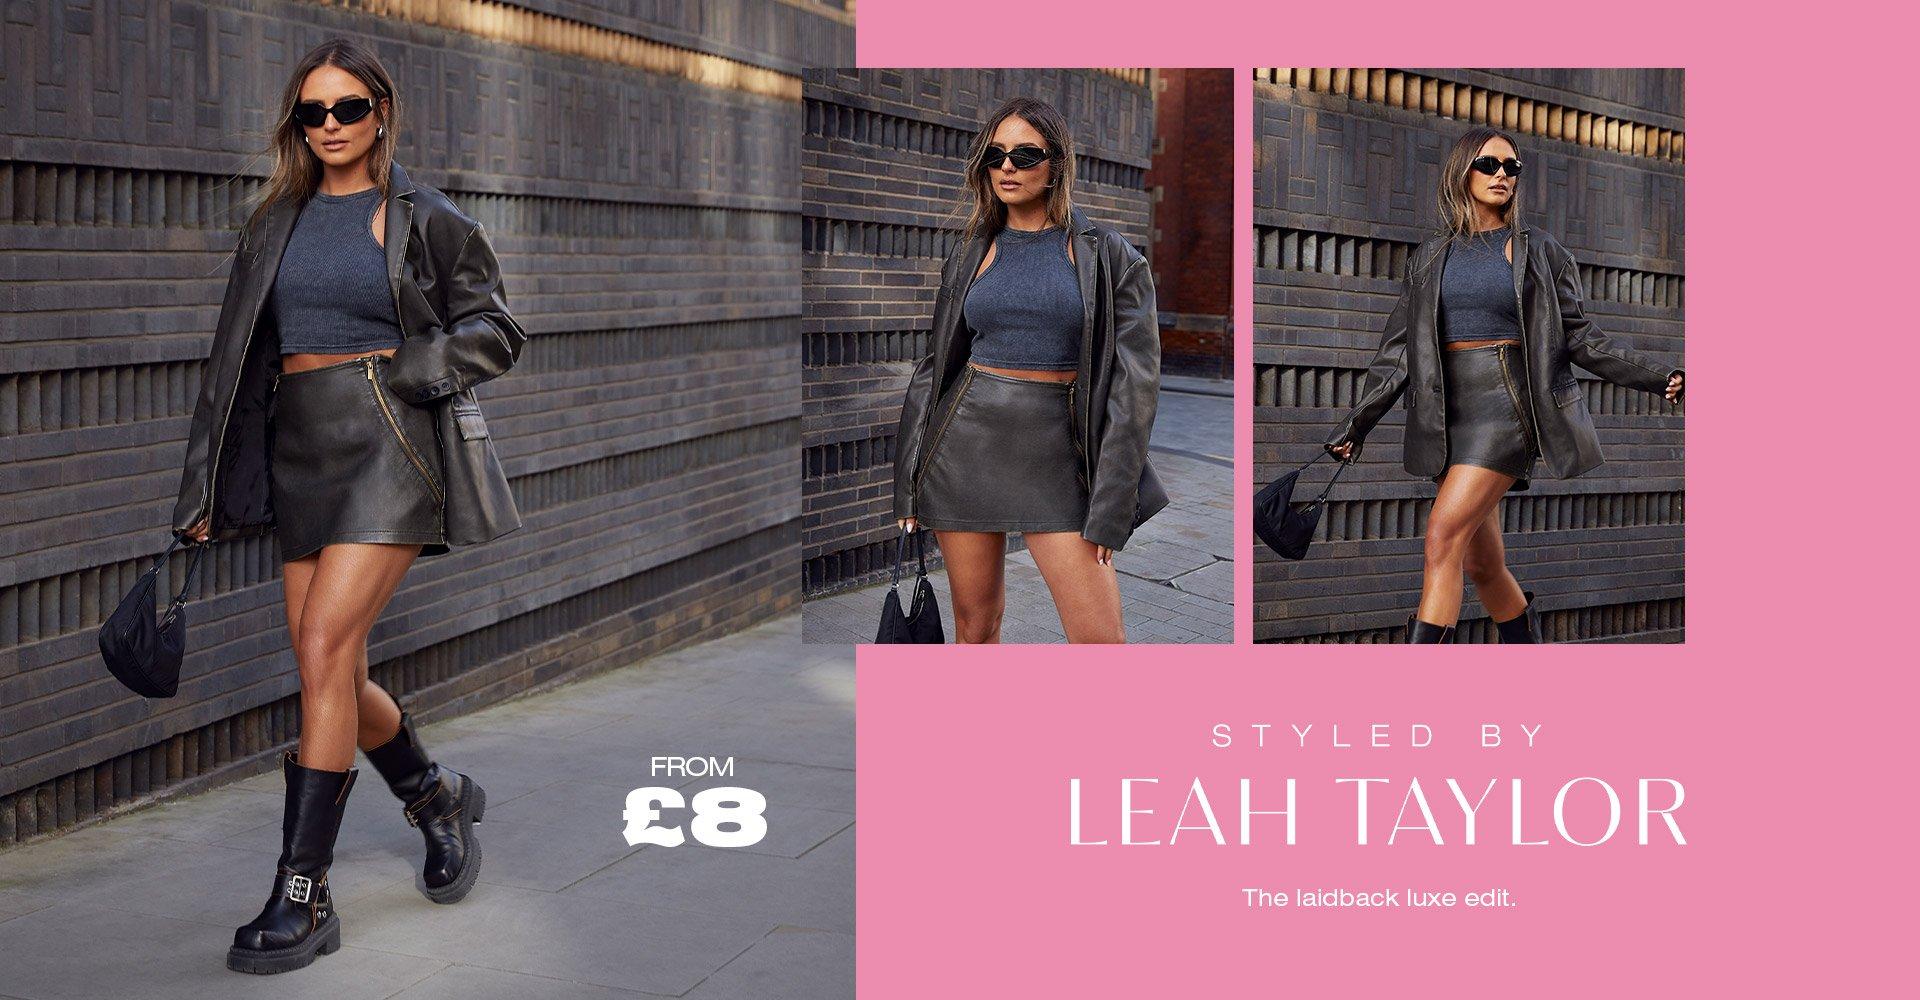 STYLED BY LEAH TAYLOR The laidback luxe edit FROM £8